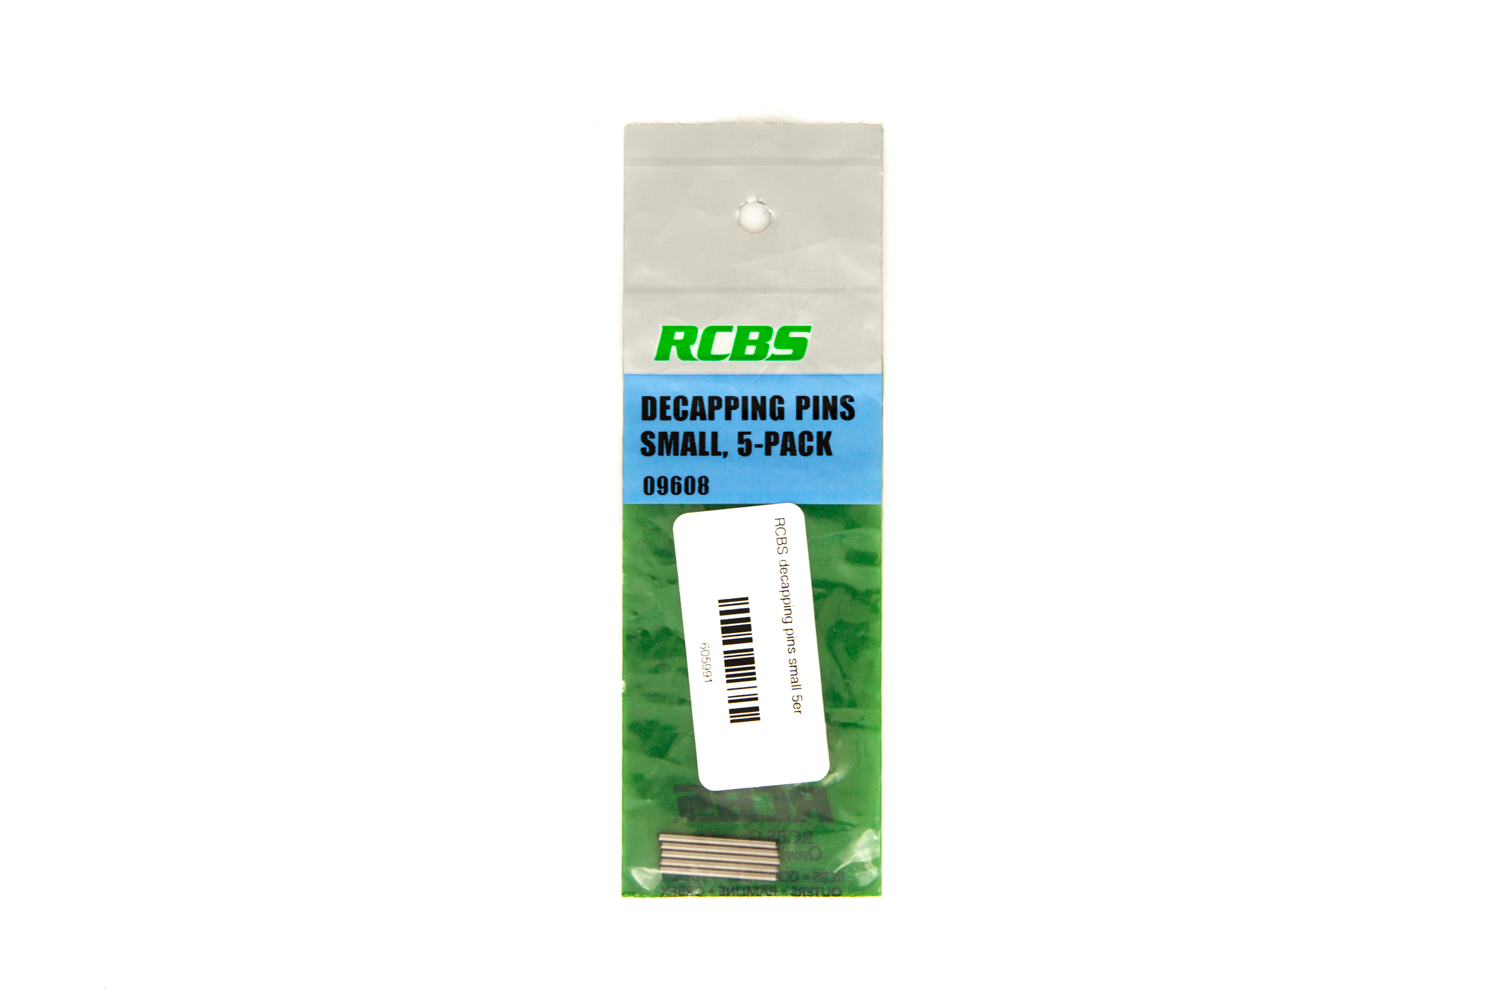 RCBS decapping pins small 5er